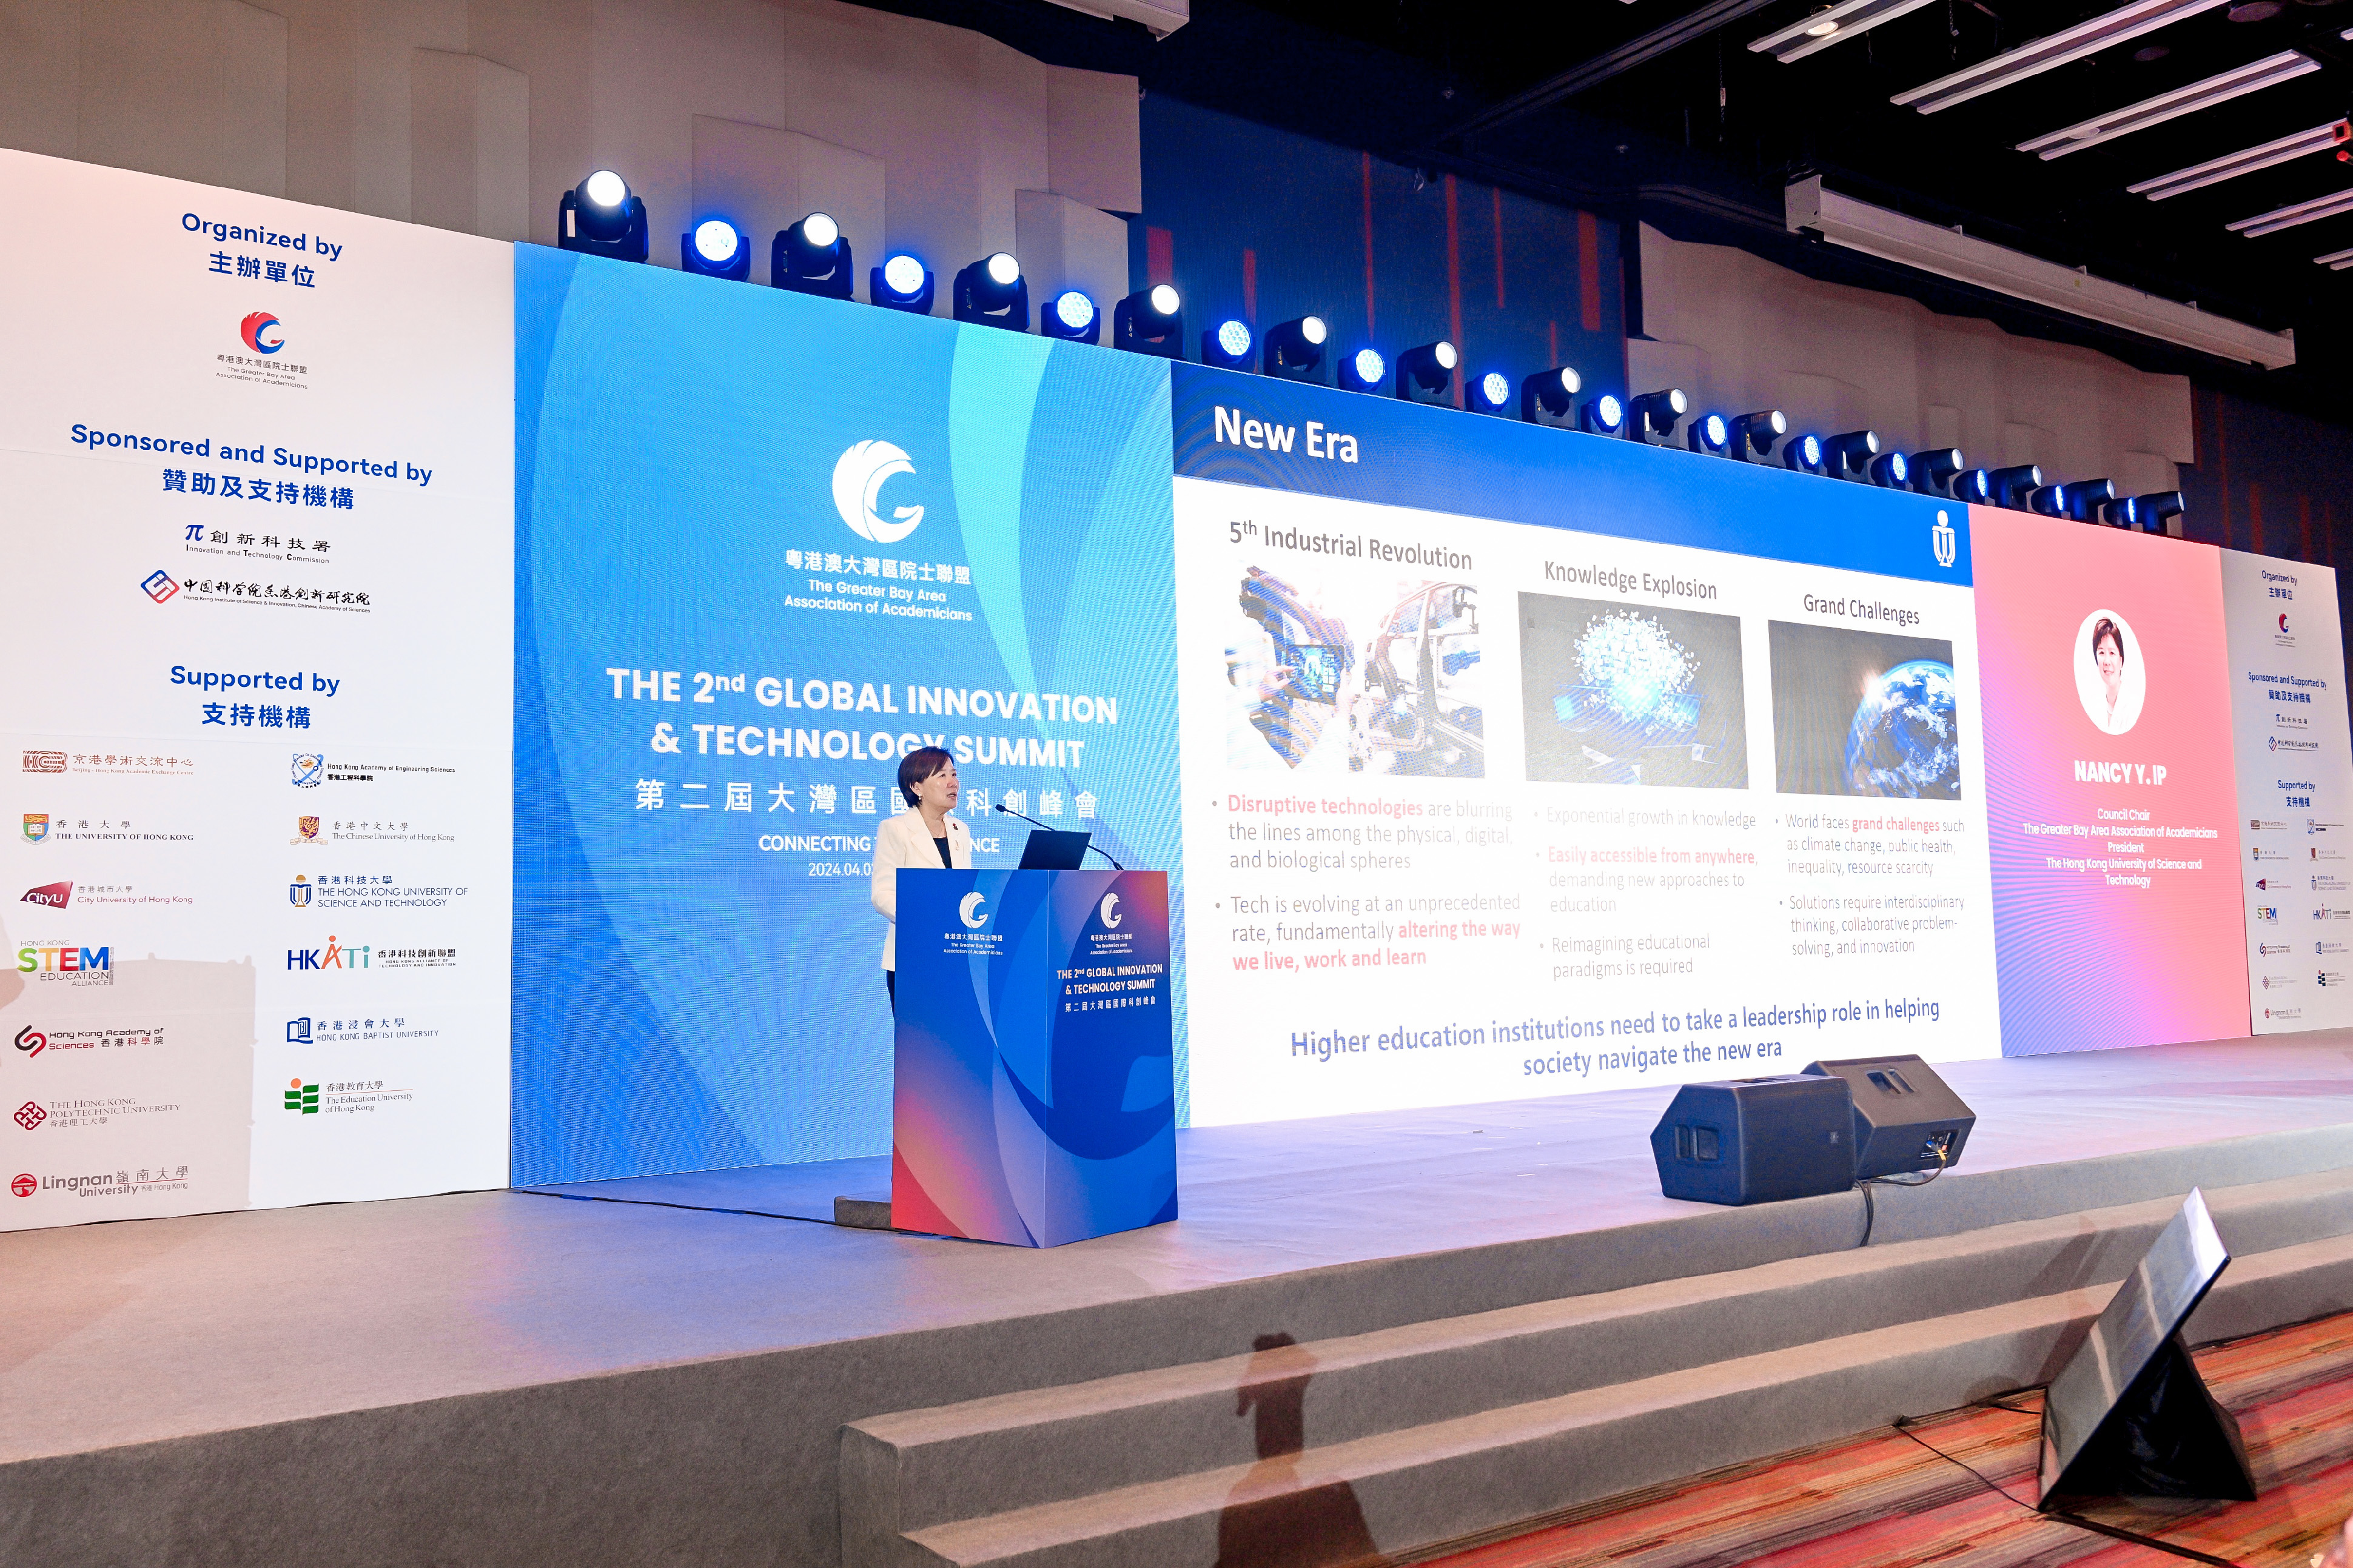 Prof. Nancy IP delivered a keynote speech on leveraging higher education to empower the future.